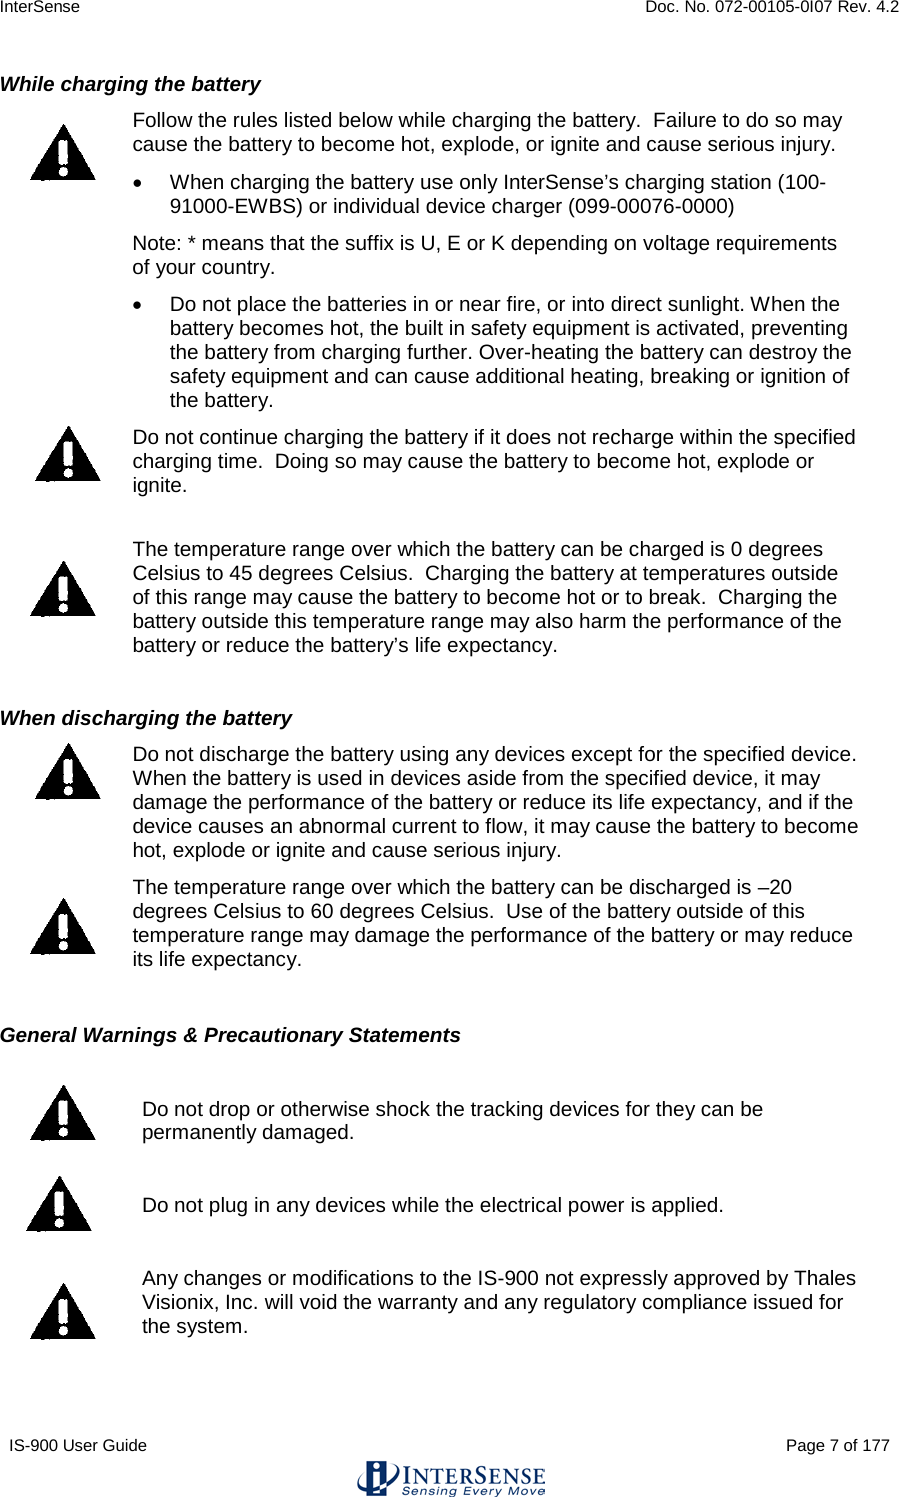 InterSense    Doc. No. 072-00105-0I07 Rev. 4.2 IS-900 User Guide                                                                                                                                          Page 7 of 177  While charging the battery  Follow the rules listed below while charging the battery.  Failure to do so may cause the battery to become hot, explode, or ignite and cause serious injury. • When charging the battery use only InterSense’s charging station (100-91000-EWBS) or individual device charger (099-00076-0000)   Note: * means that the suffix is U, E or K depending on voltage requirements of your country. • Do not place the batteries in or near fire, or into direct sunlight. When the battery becomes hot, the built in safety equipment is activated, preventing the battery from charging further. Over-heating the battery can destroy the safety equipment and can cause additional heating, breaking or ignition of the battery.  Do not continue charging the battery if it does not recharge within the specified charging time.  Doing so may cause the battery to become hot, explode or ignite.  The temperature range over which the battery can be charged is 0 degrees Celsius to 45 degrees Celsius.  Charging the battery at temperatures outside of this range may cause the battery to become hot or to break.  Charging the battery outside this temperature range may also harm the performance of the battery or reduce the battery’s life expectancy.  When discharging the battery  Do not discharge the battery using any devices except for the specified device.  When the battery is used in devices aside from the specified device, it may damage the performance of the battery or reduce its life expectancy, and if the device causes an abnormal current to flow, it may cause the battery to become hot, explode or ignite and cause serious injury.  The temperature range over which the battery can be discharged is –20 degrees Celsius to 60 degrees Celsius.  Use of the battery outside of this temperature range may damage the performance of the battery or may reduce its life expectancy.  General Warnings &amp; Precautionary Statements   Do not drop or otherwise shock the tracking devices for they can be permanently damaged.  Do not plug in any devices while the electrical power is applied.   Any changes or modifications to the IS-900 not expressly approved by Thales Visionix, Inc. will void the warranty and any regulatory compliance issued for the system. 